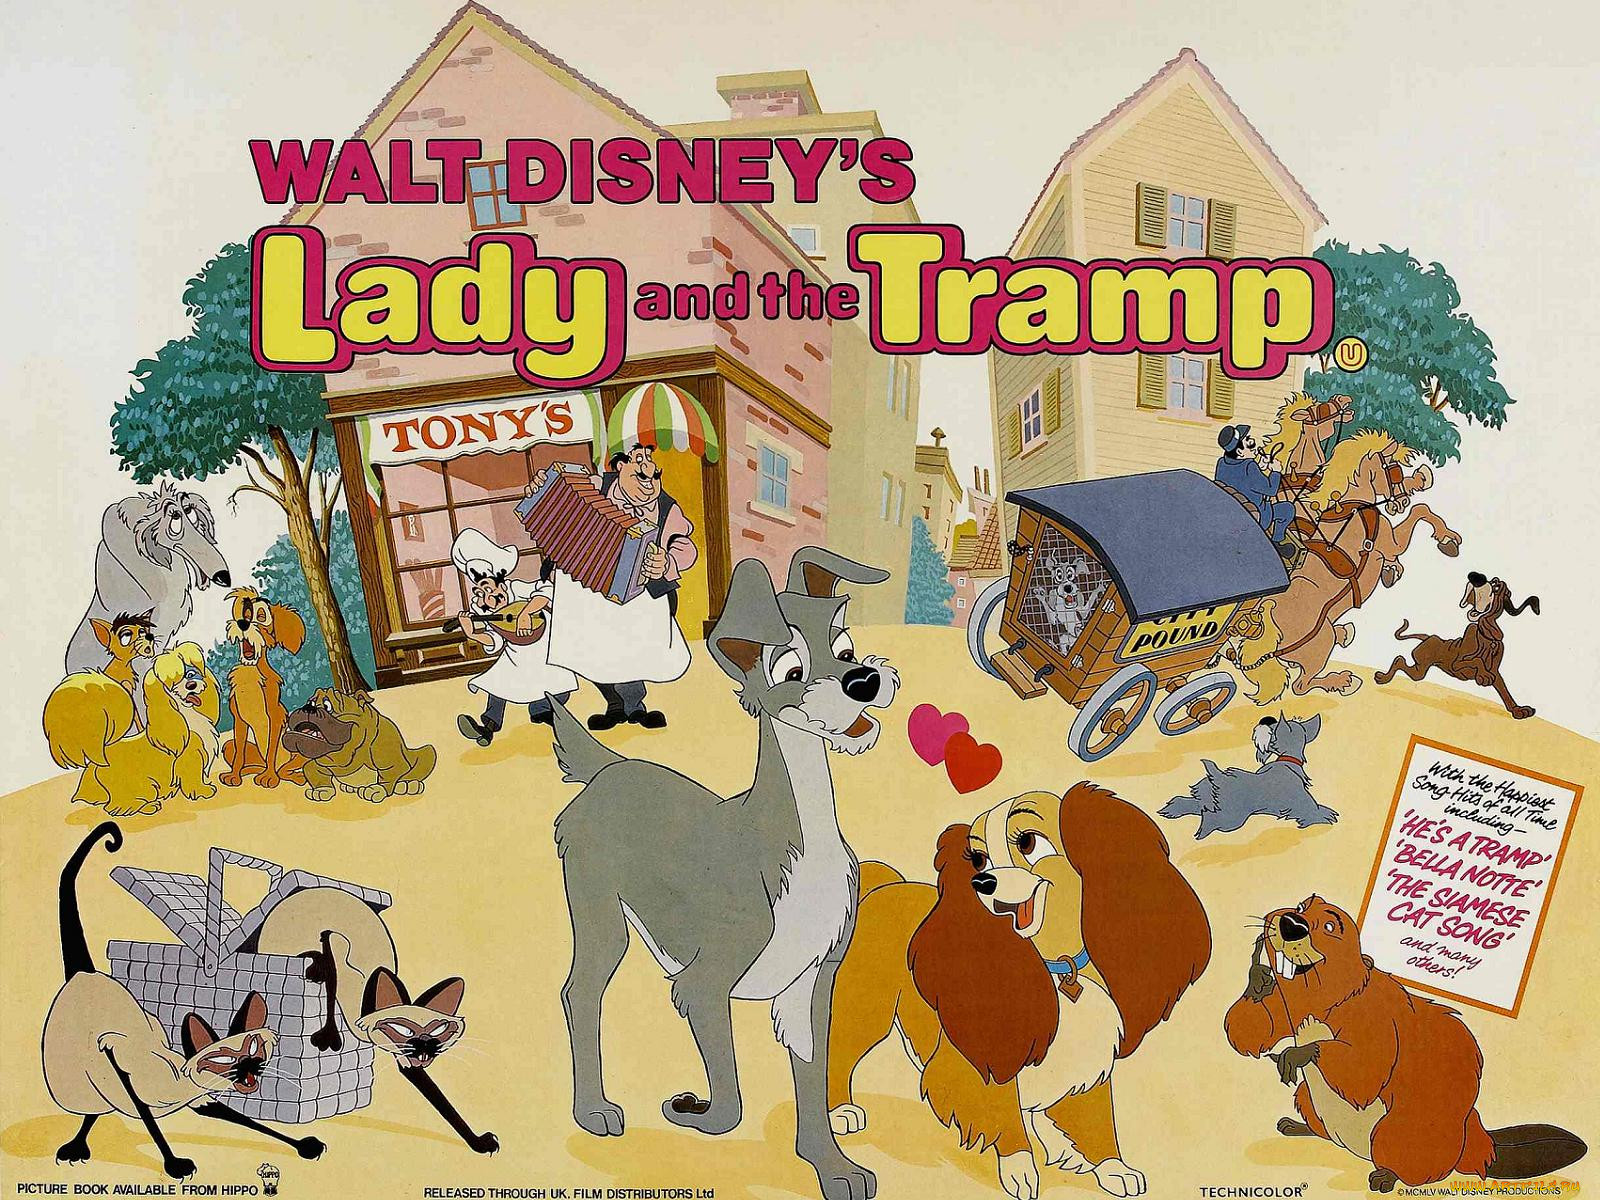 , lady, and, the, tramp